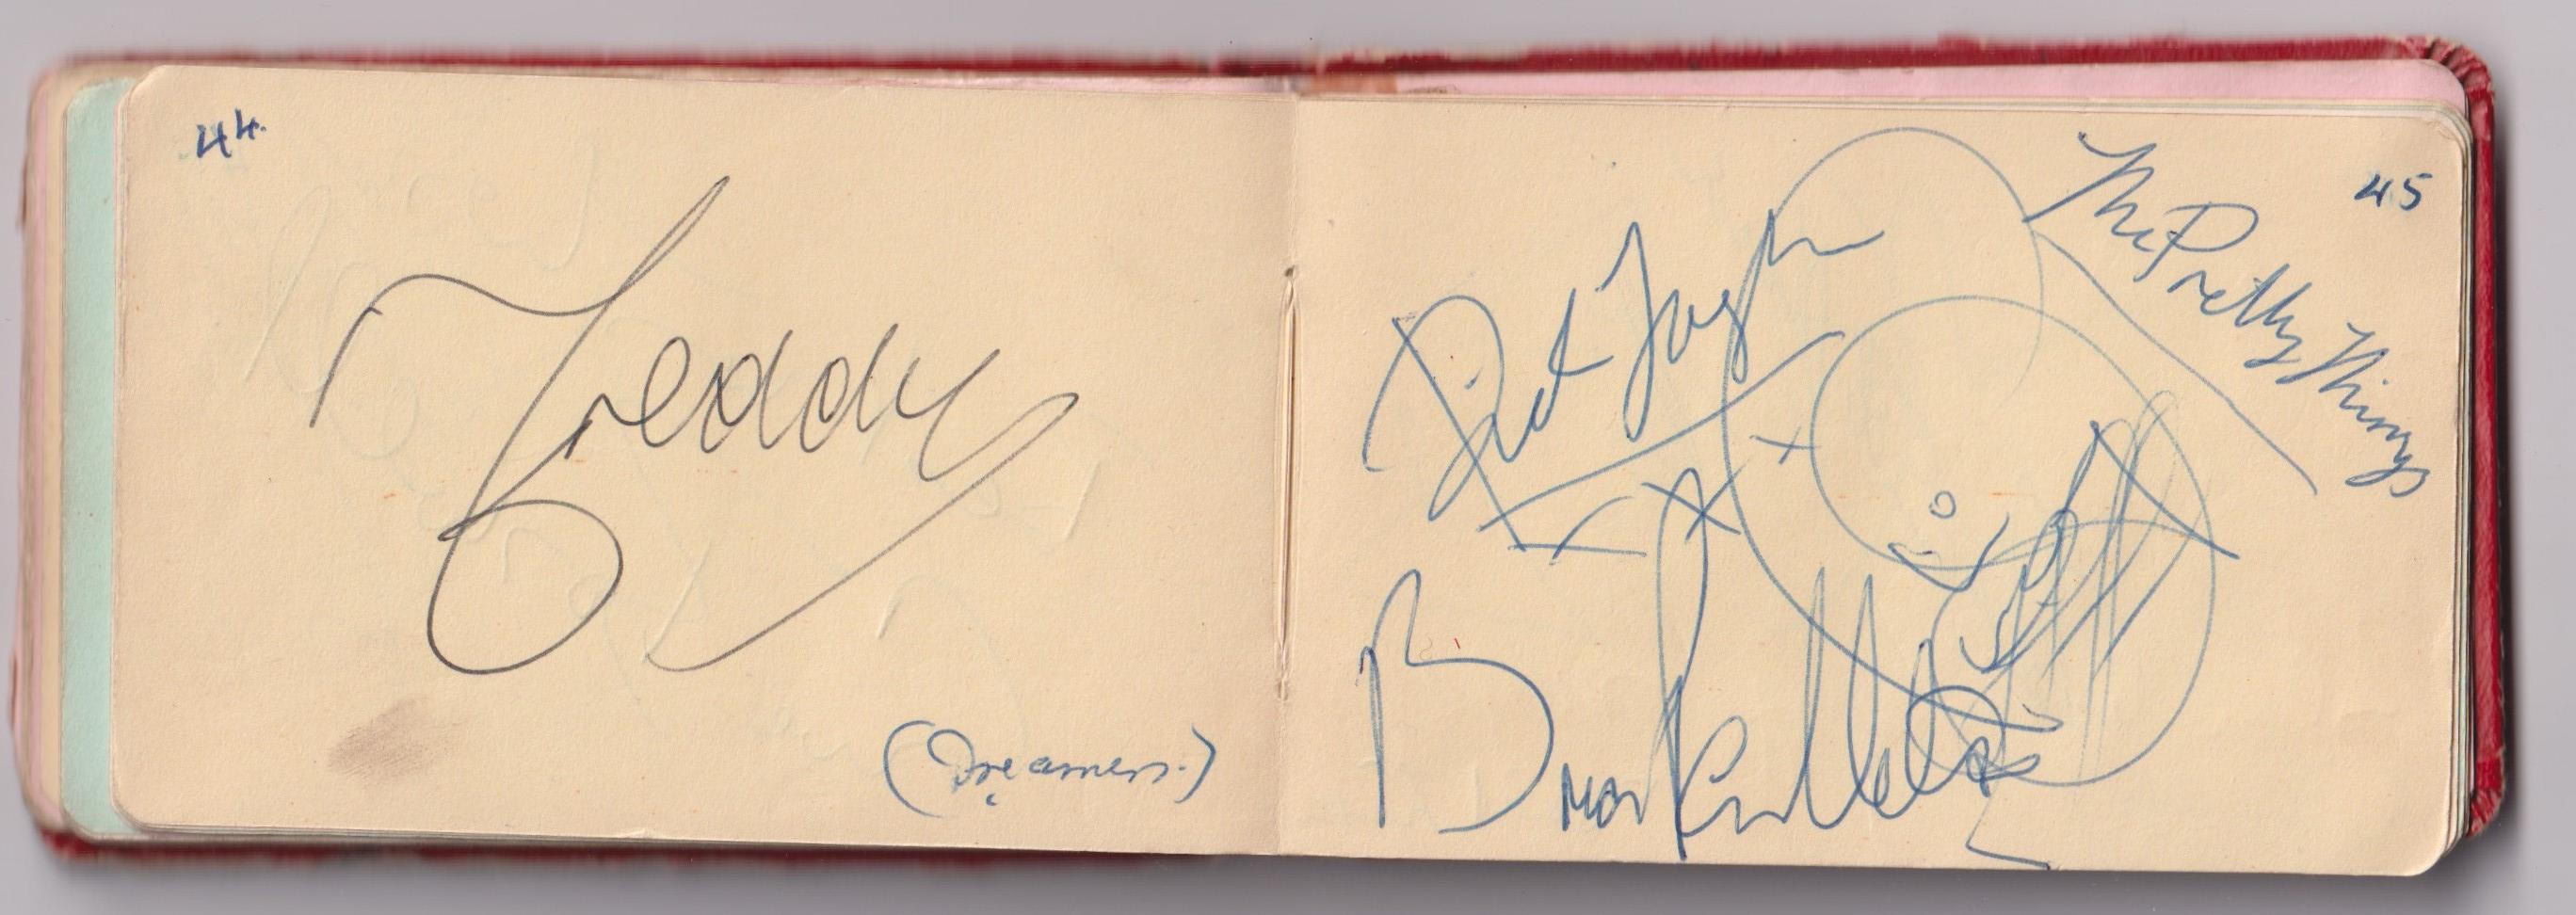 Autographs, a small autograph book belonging to a lady who worked in Heathrow Airport during the - Image 3 of 4